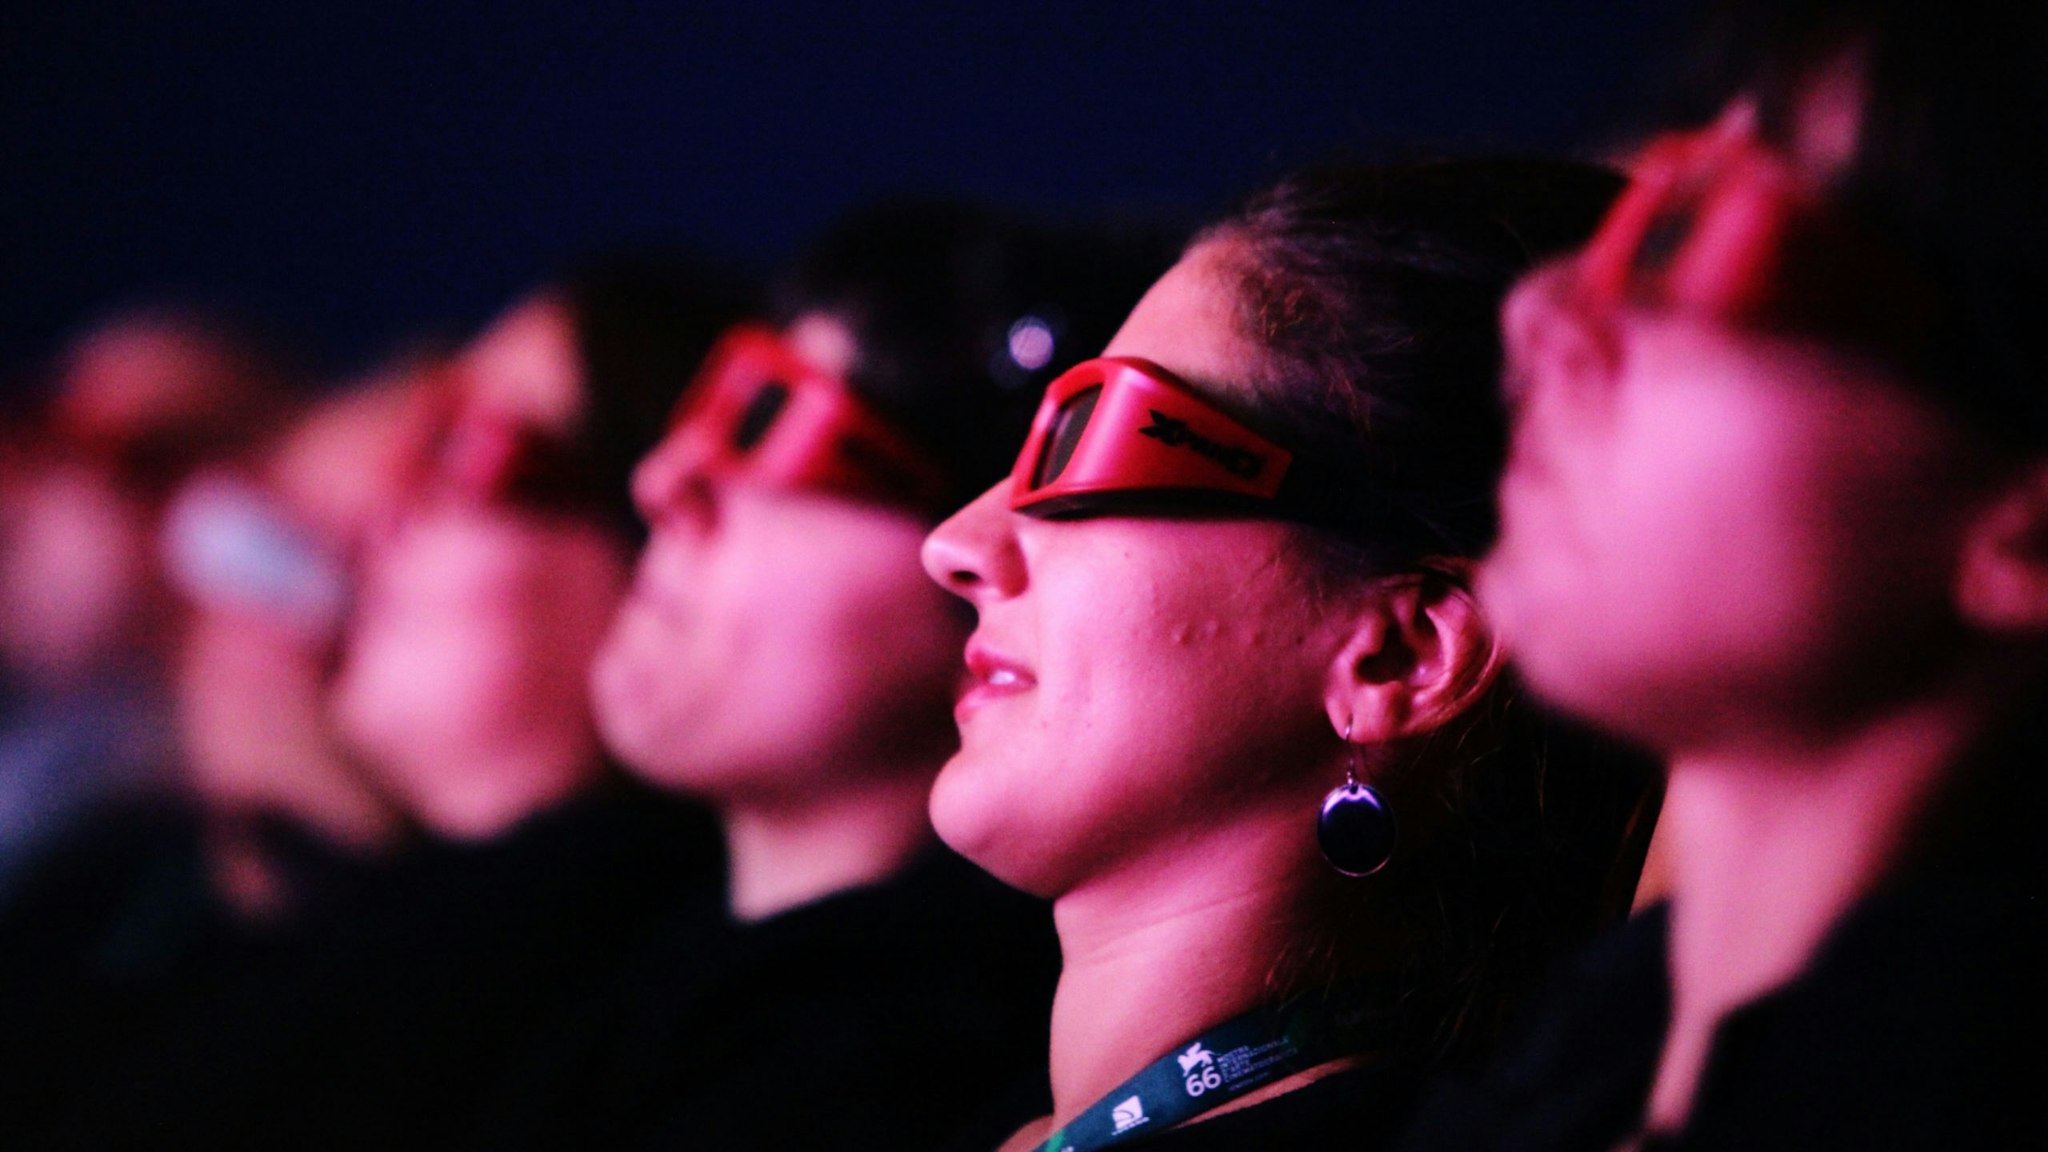 Audience watch through 3D glasses attends the "Premio Persol 3D Award & The Hole" premiere at the Sala Grande during the 66th Venice Film Festival on September 11, 2009 in Venice, Italy.